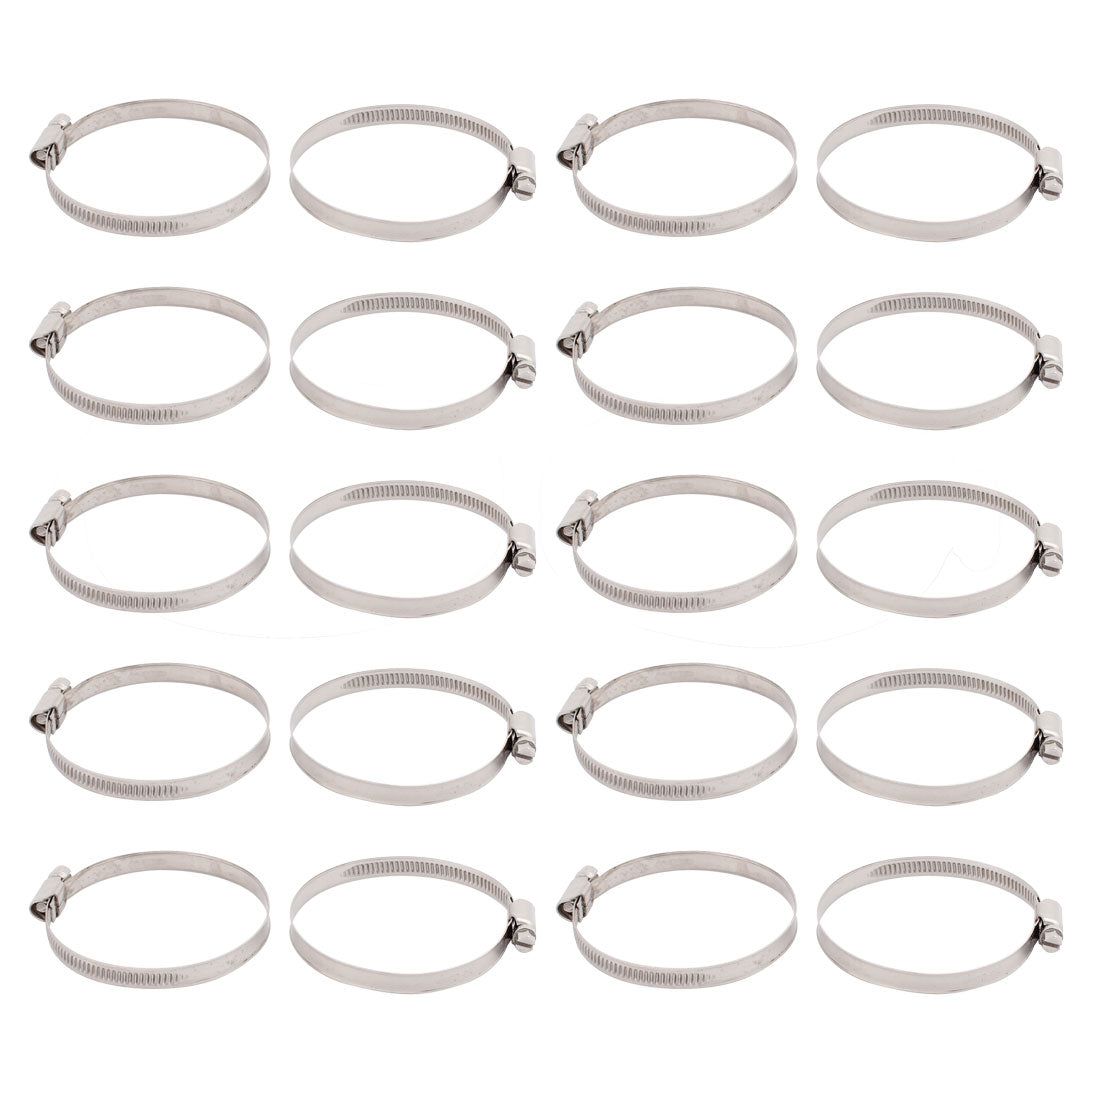 uxcell Uxcell 20pcs 60-80mm Clamping Range 8mm Width German Steel Hose Clamp